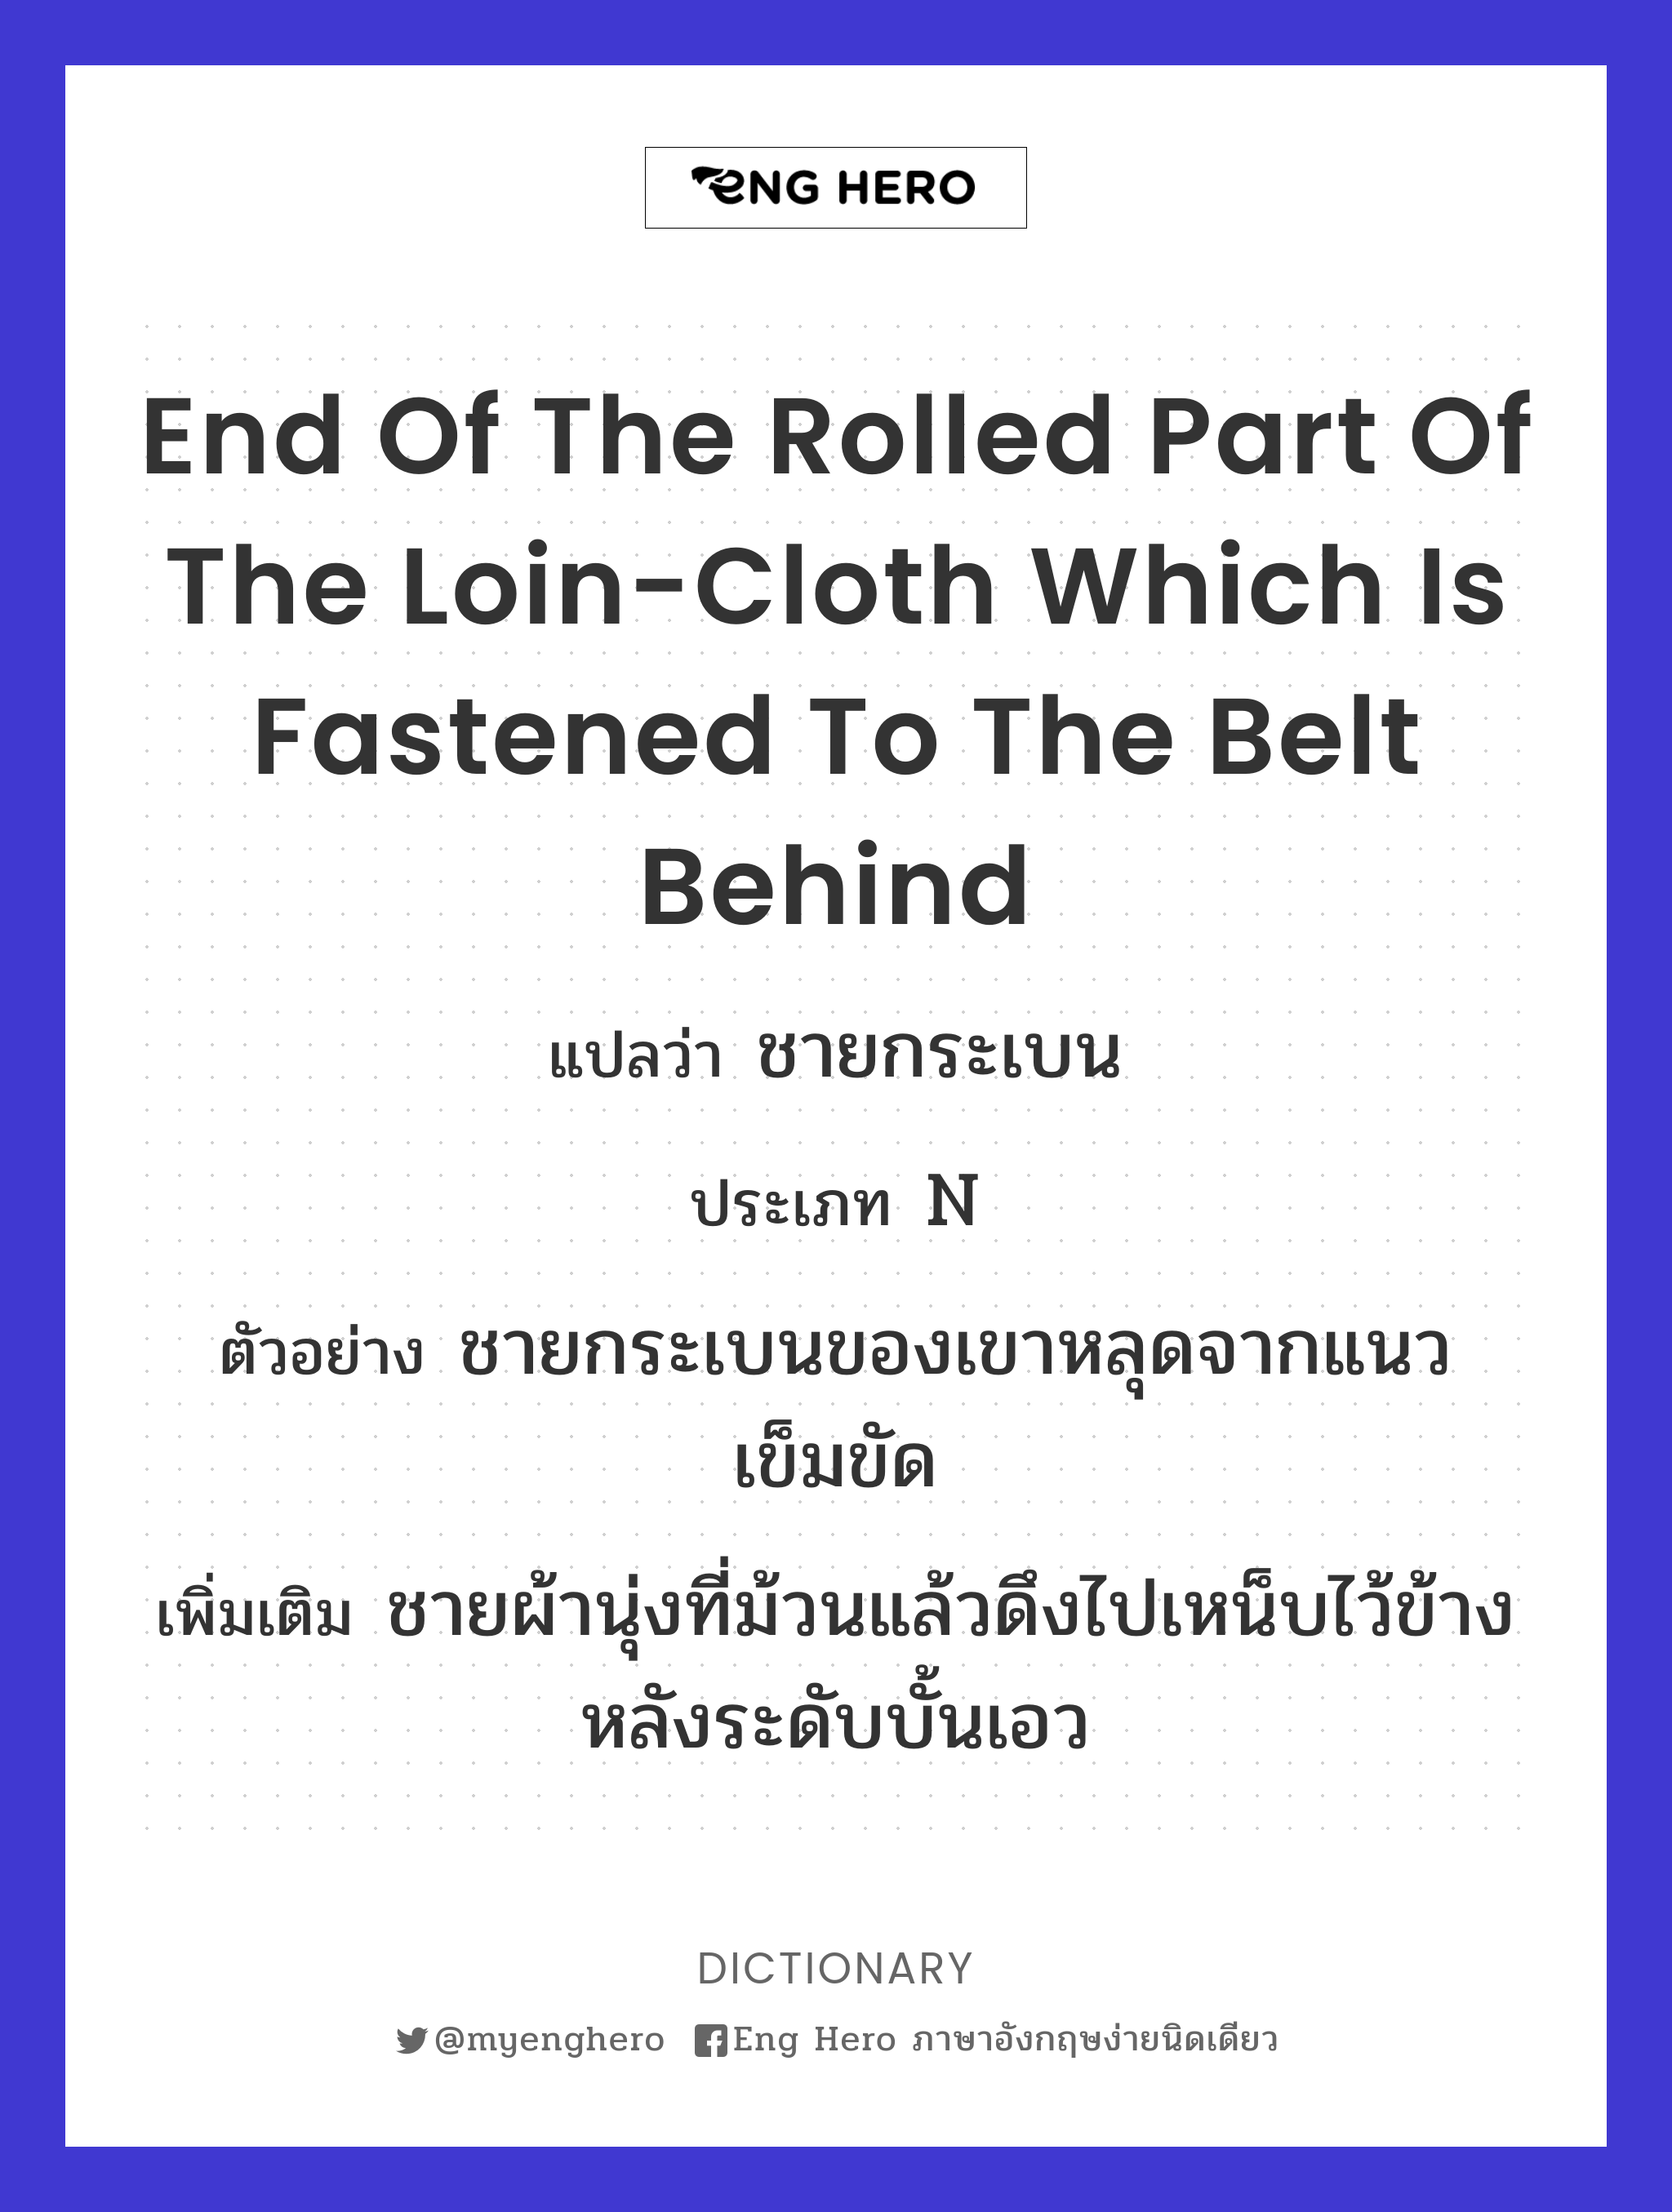 end of the rolled part of the loin-cloth which is fastened to the belt behind